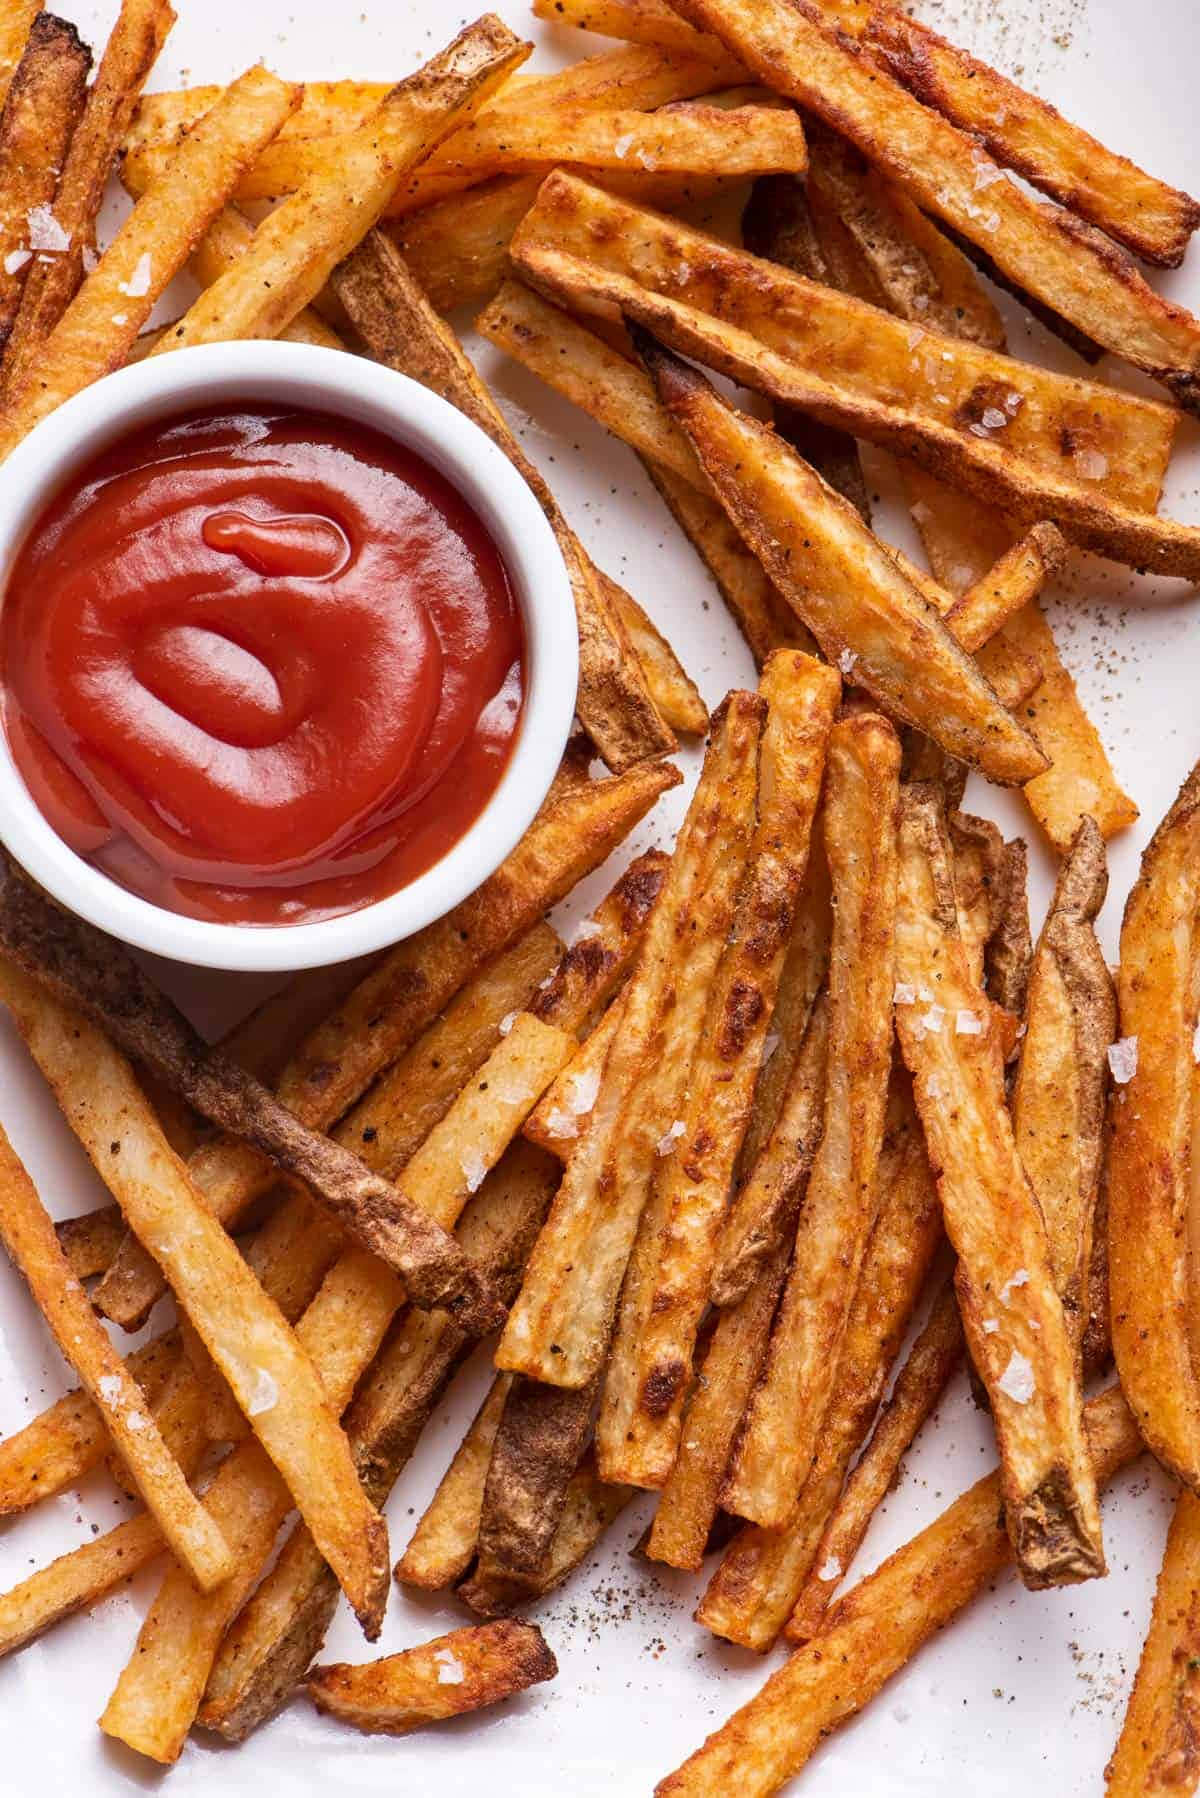 Delicious French Fries Ready To Be Enjoyed